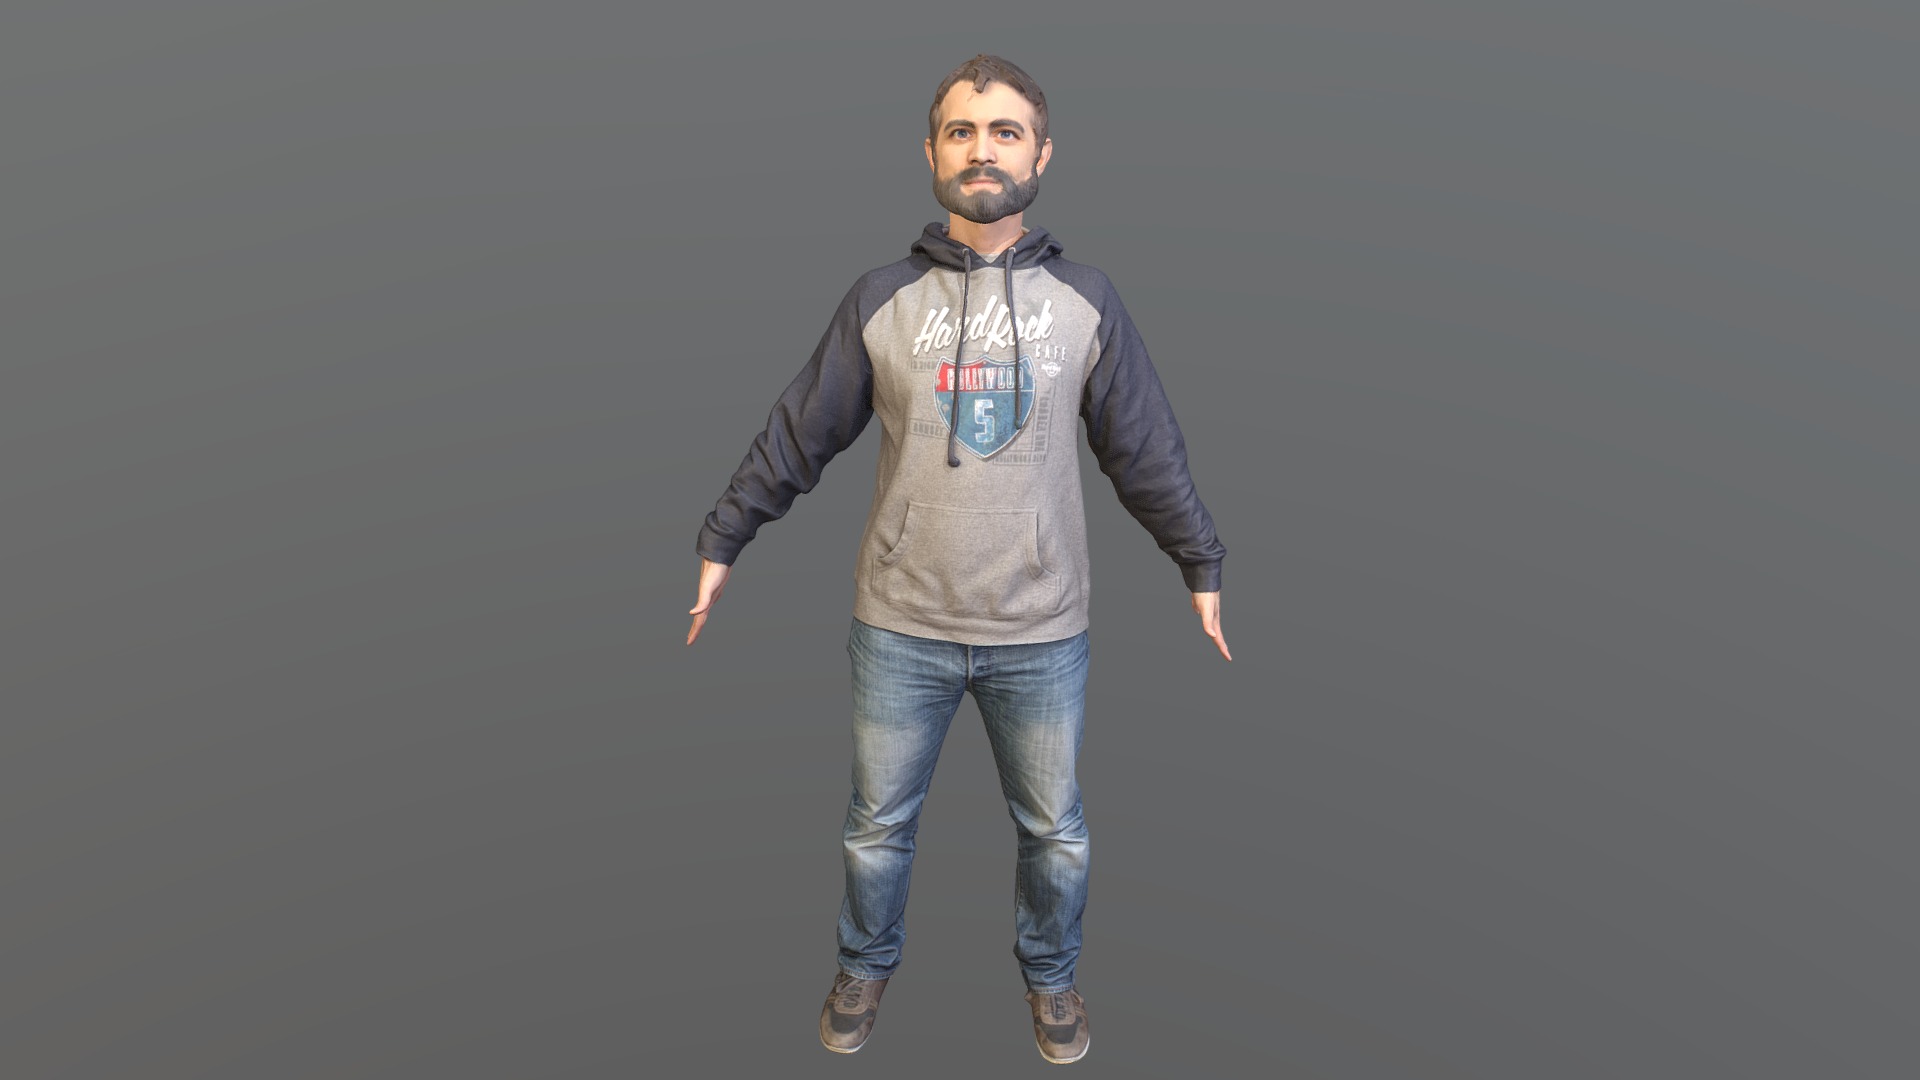 3D model Person 1 – A Pose - This is a 3D model of the Person 1 - A Pose. The 3D model is about a man standing in front of a black background.